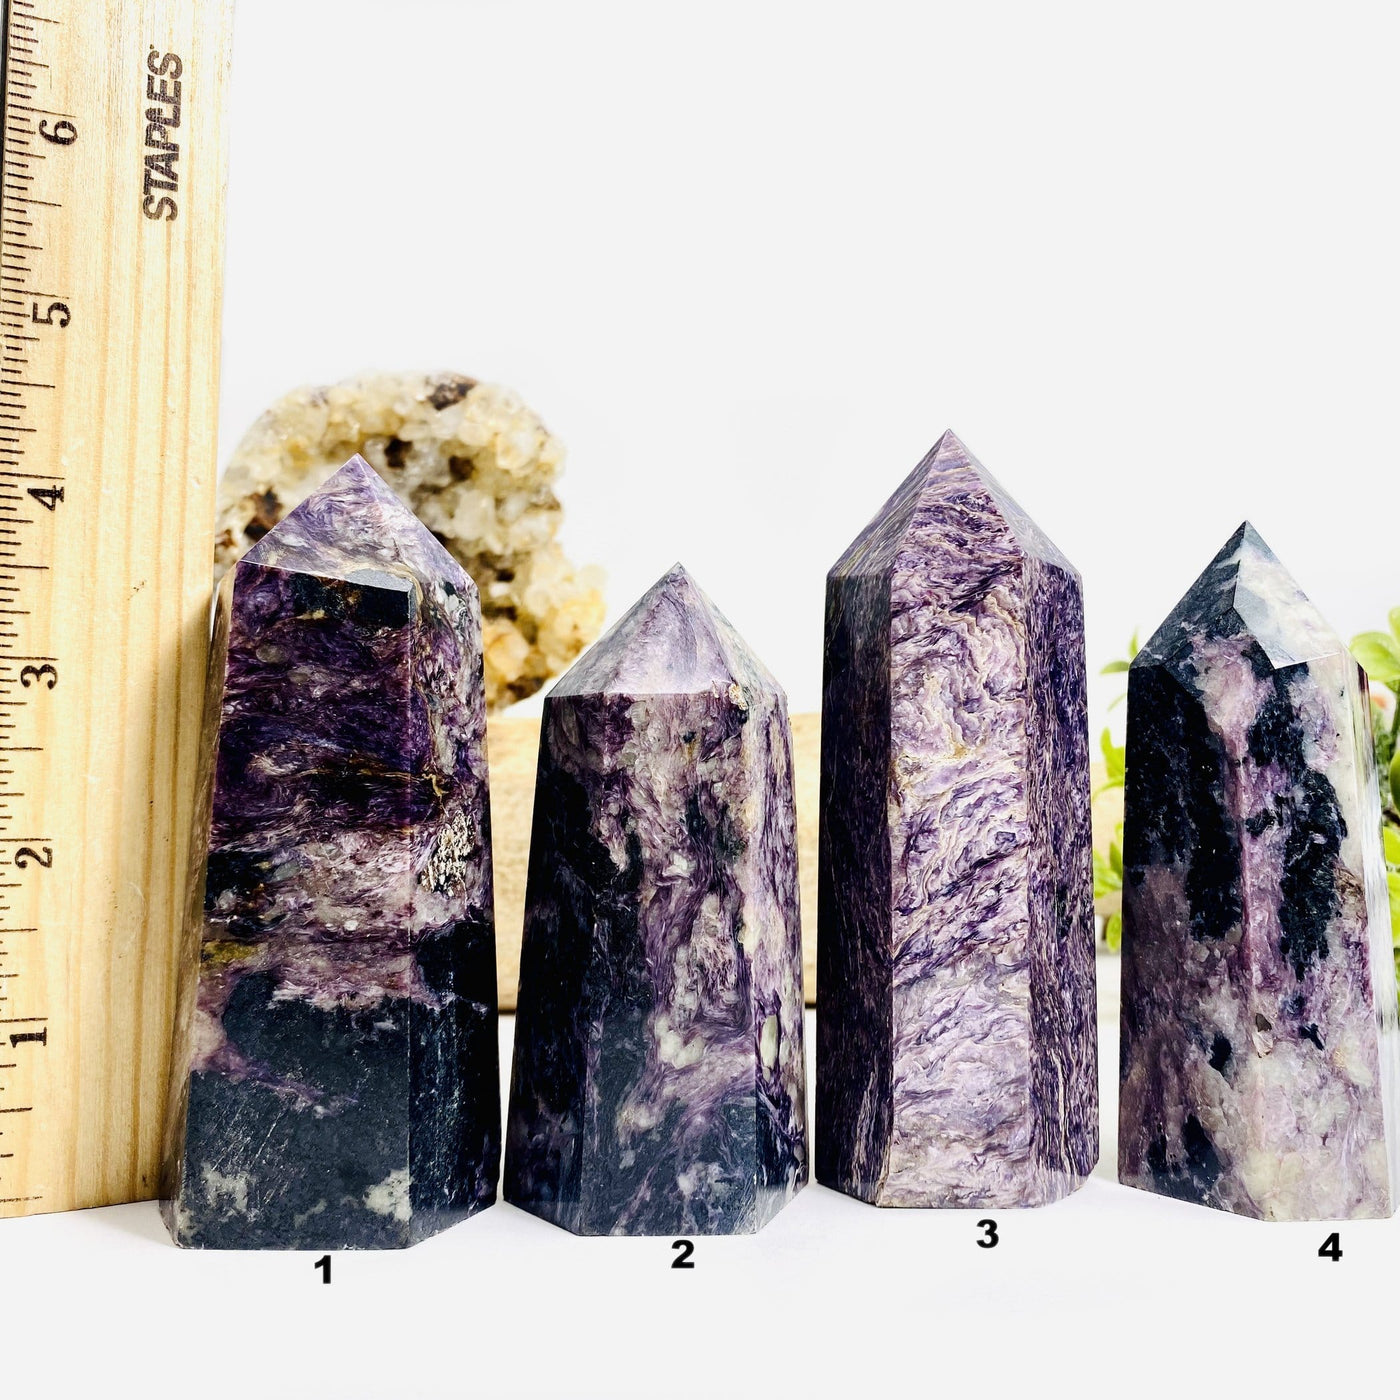 4 Charoite Polished Towers next to a ruler for size reference